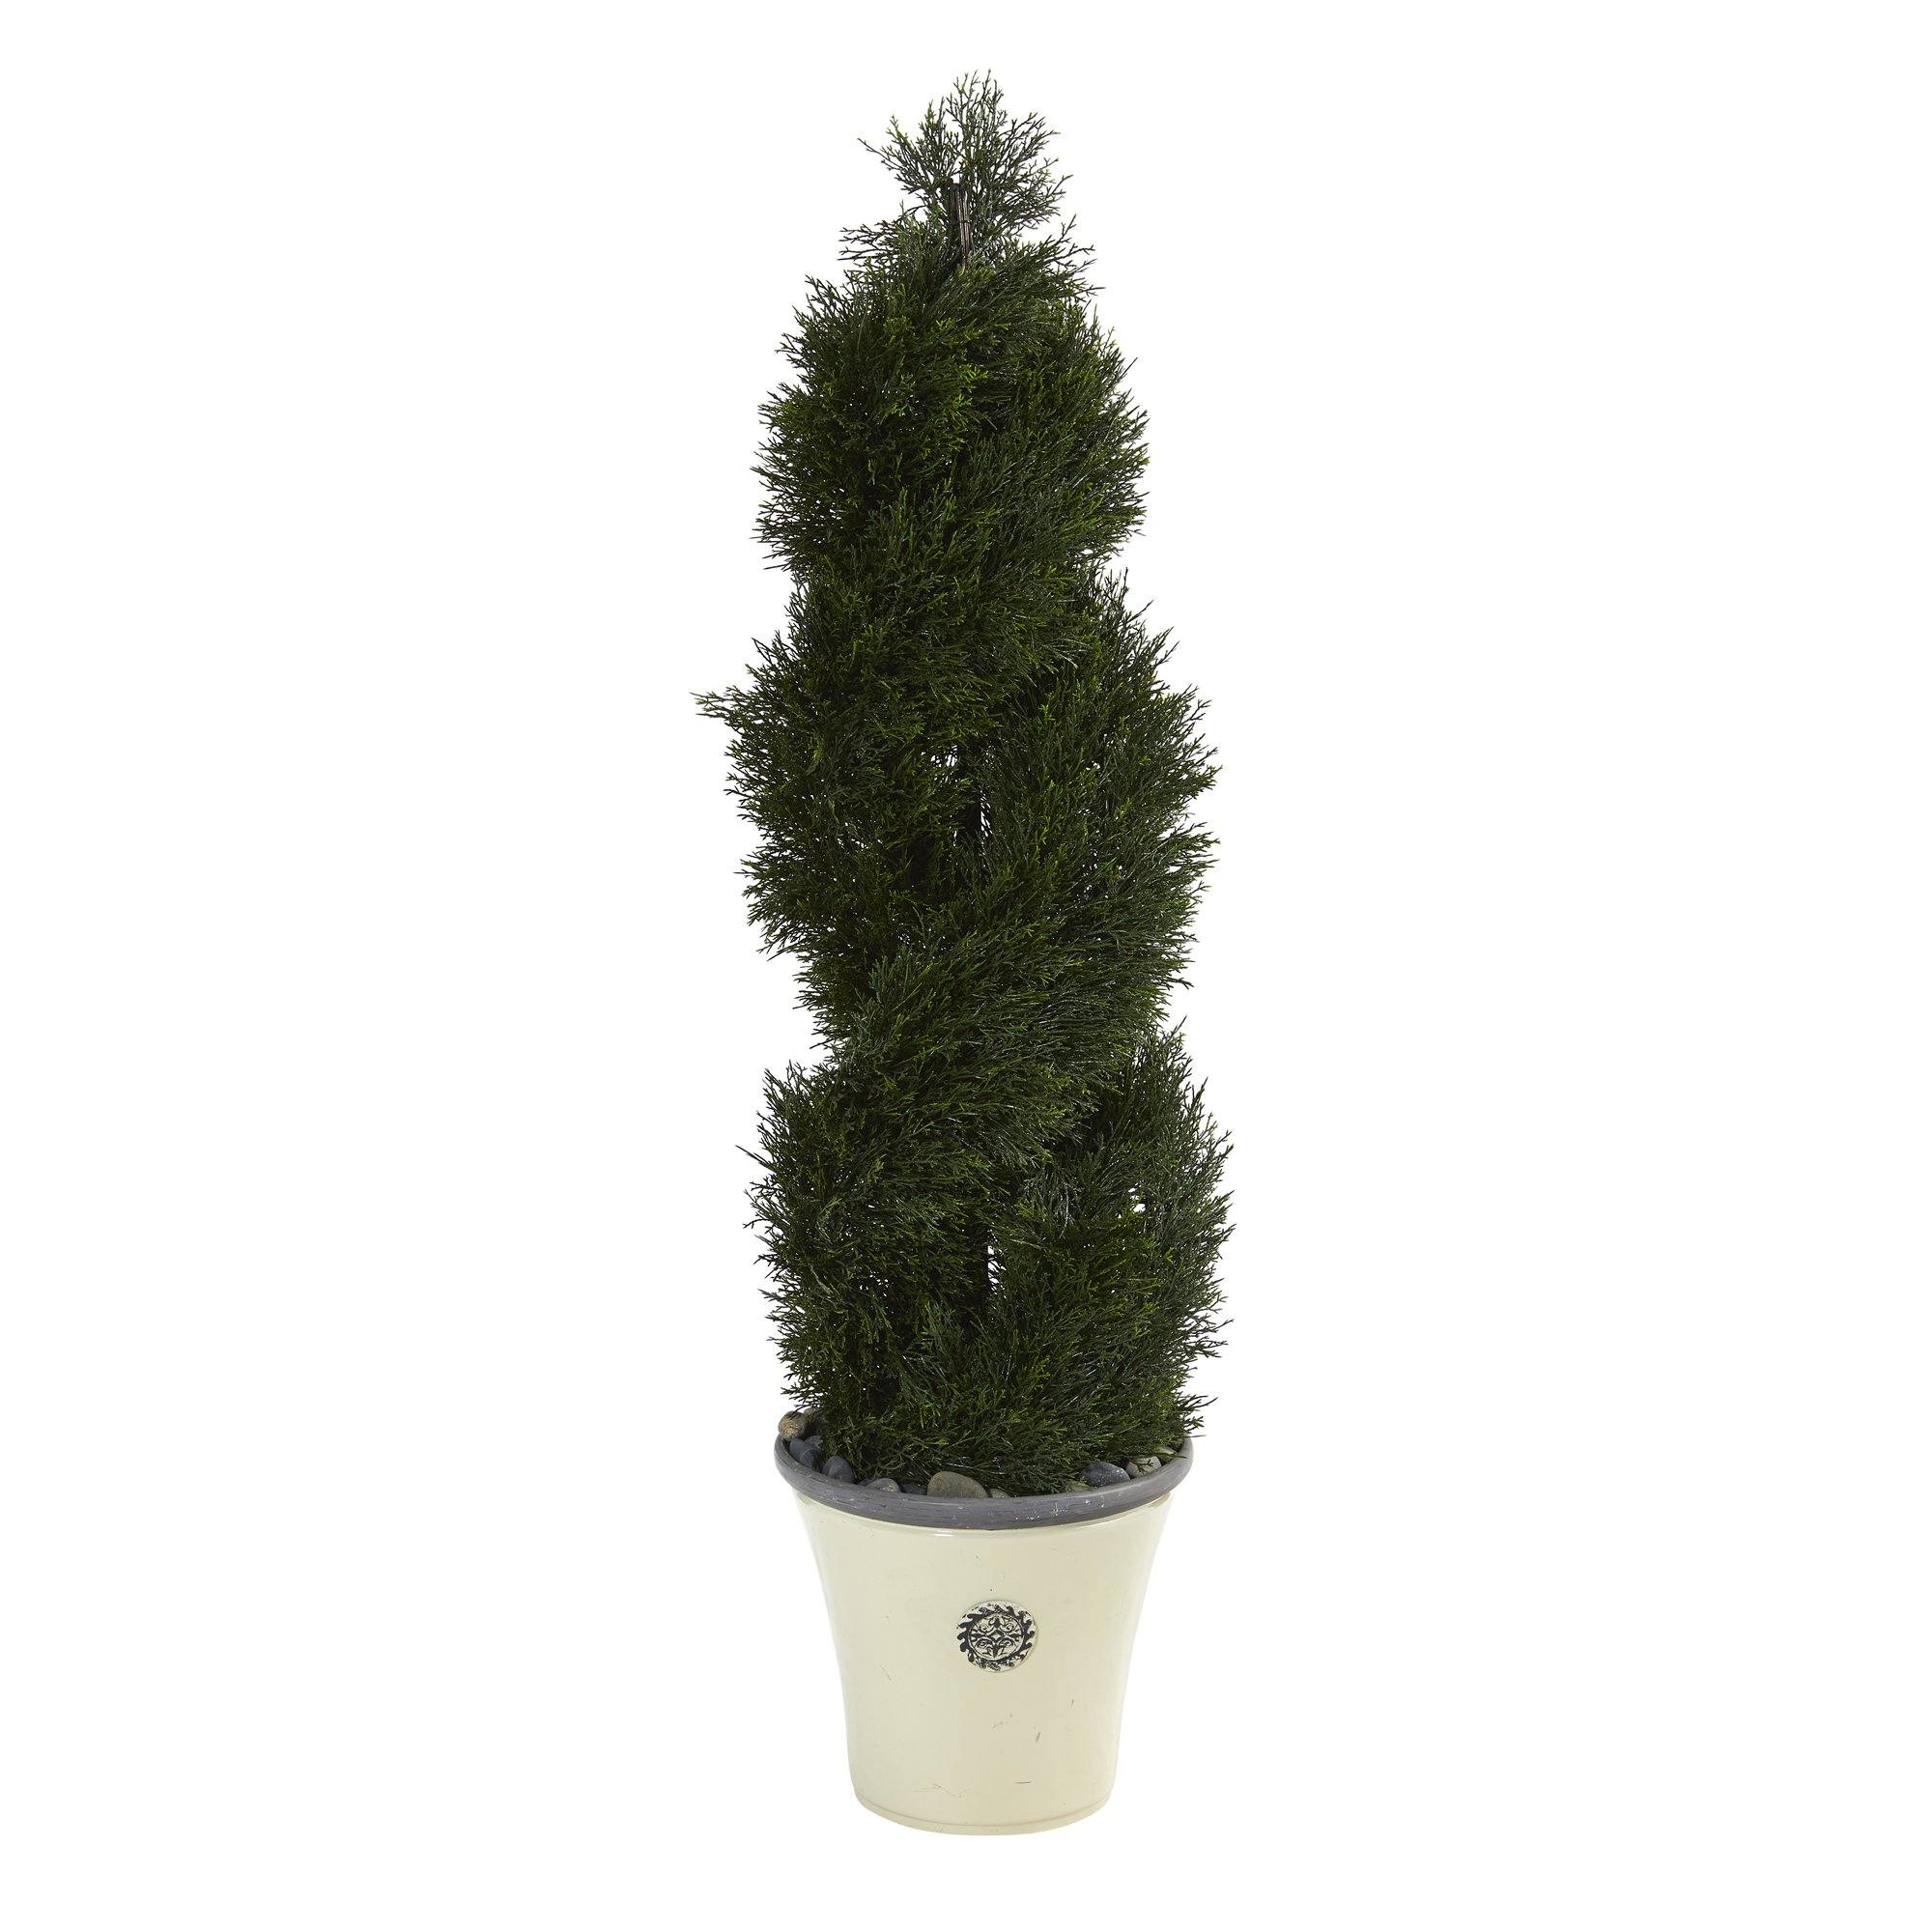 52” Double Pond Cypress Spiral Topiary Artificial Tree in Planter UV ...